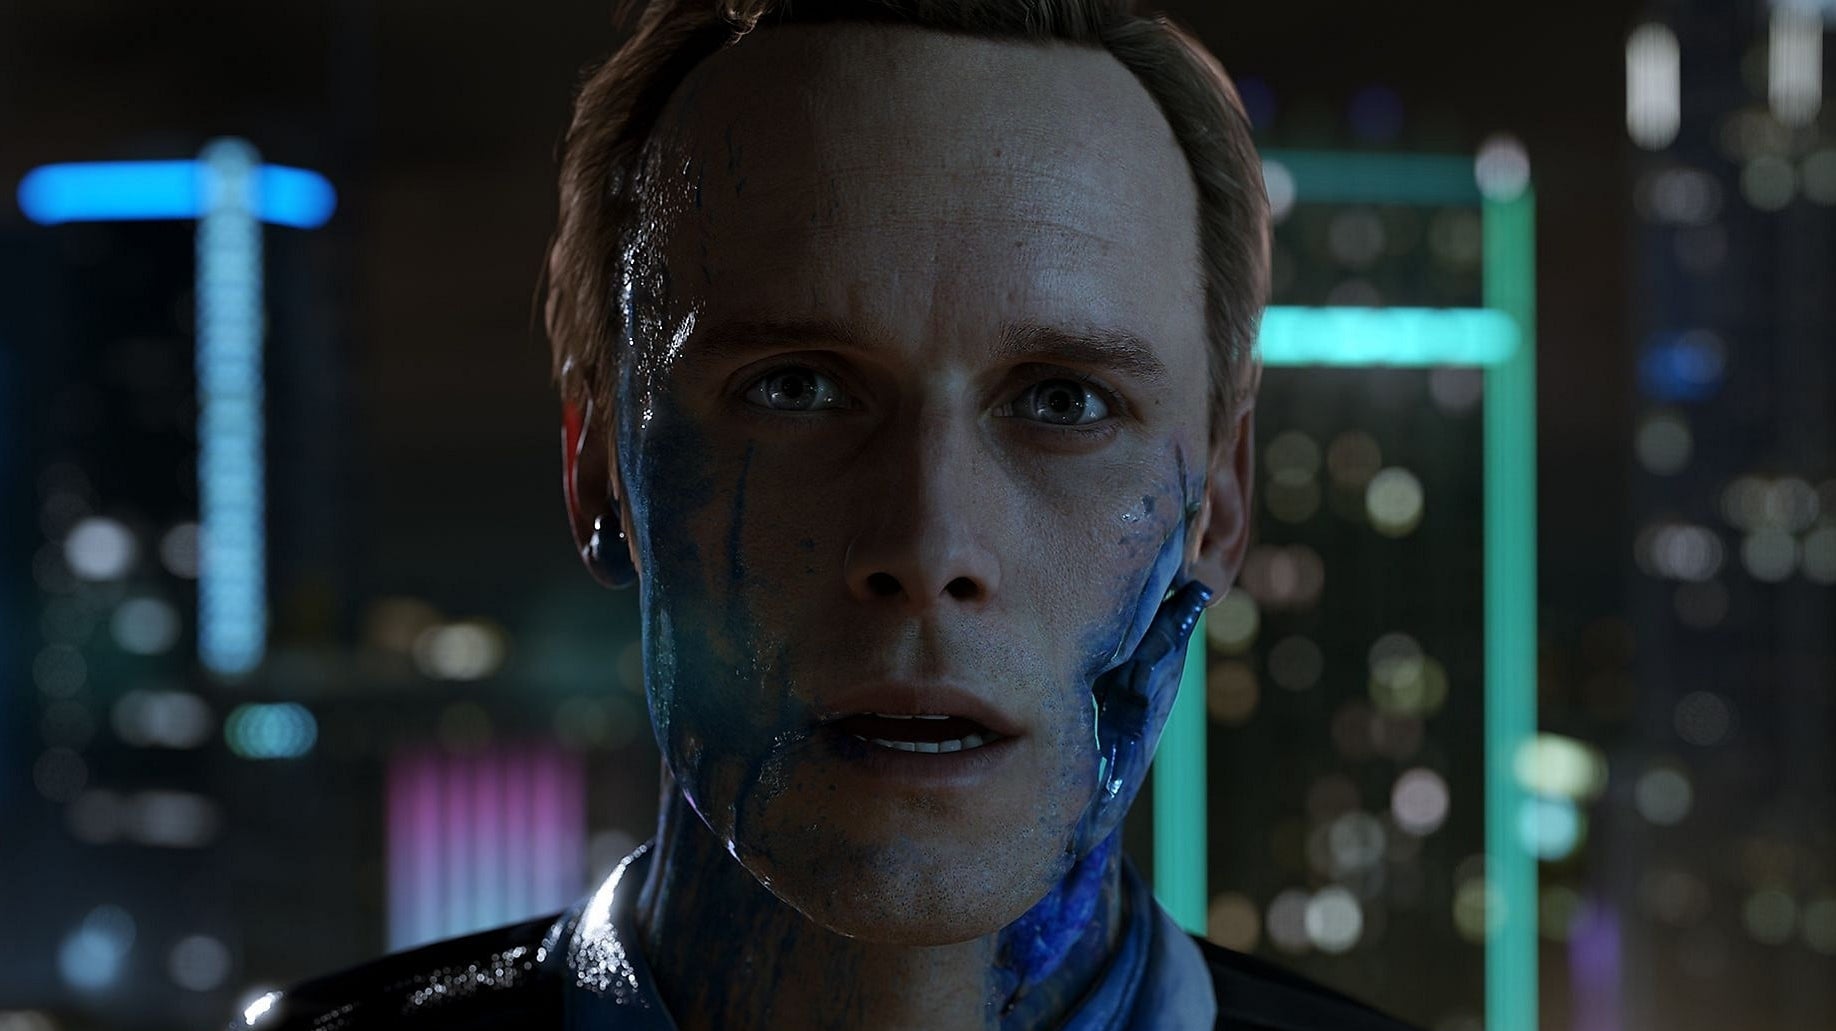 Image for HW nároky PC krabicovky Detroit: Become Human